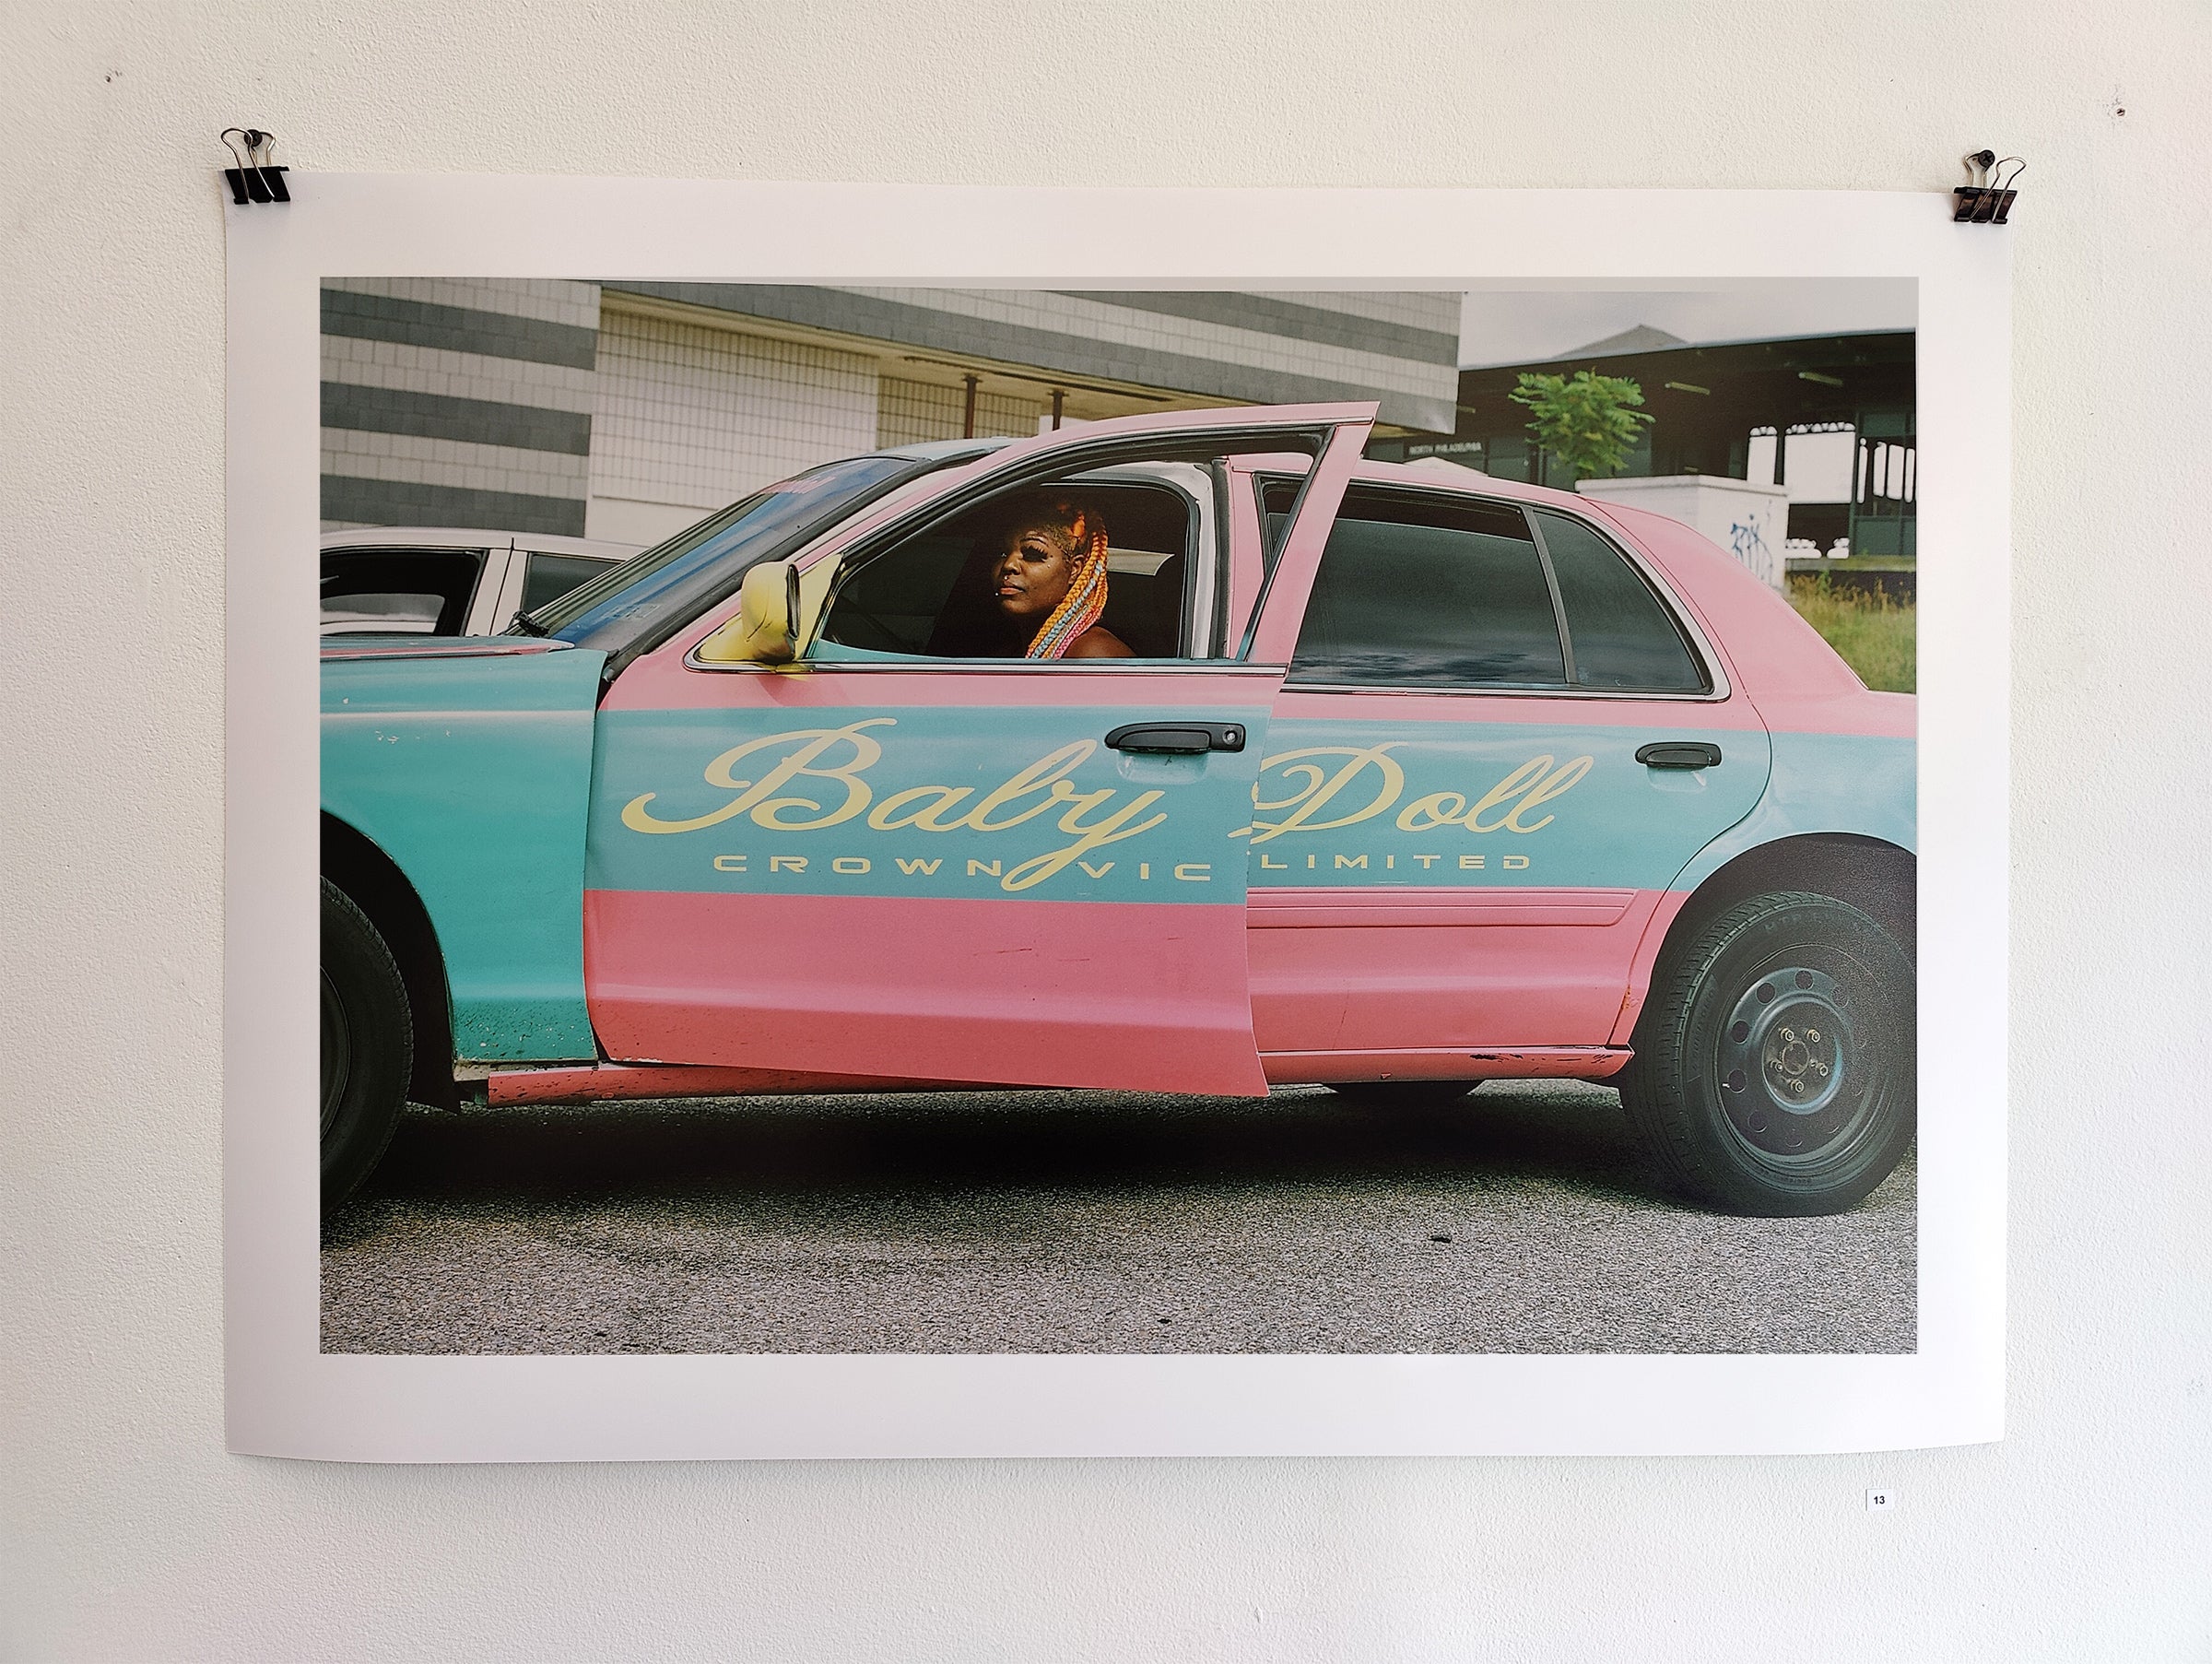 Philly’s car culture captured in photo exhibition by Sheldon Omar-Abba